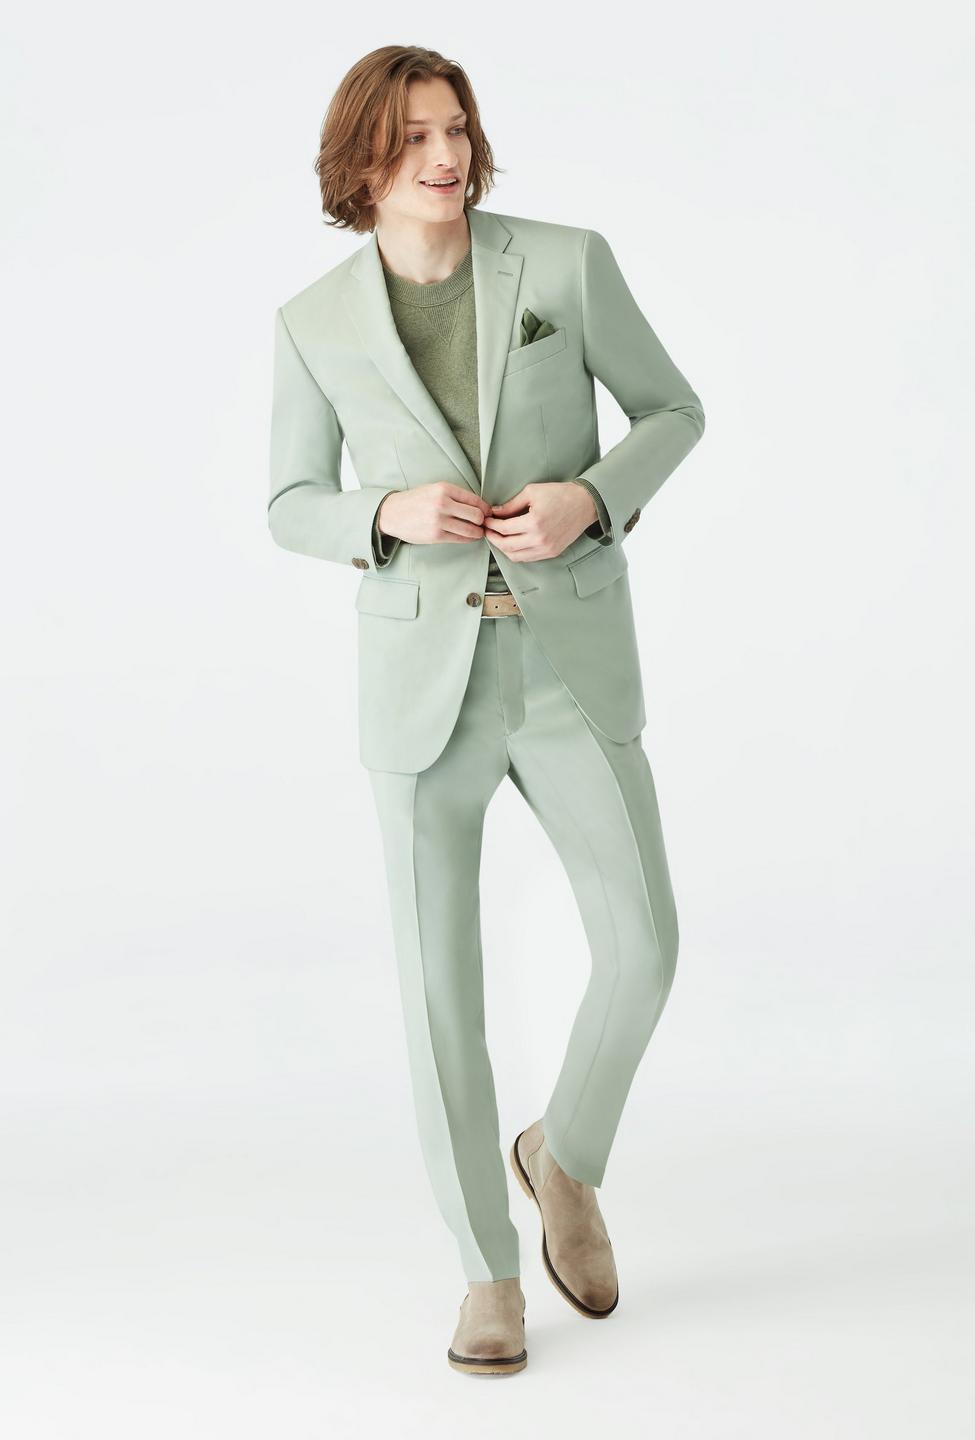 Green blazer - Solid Design from Seasonal Indochino Collection